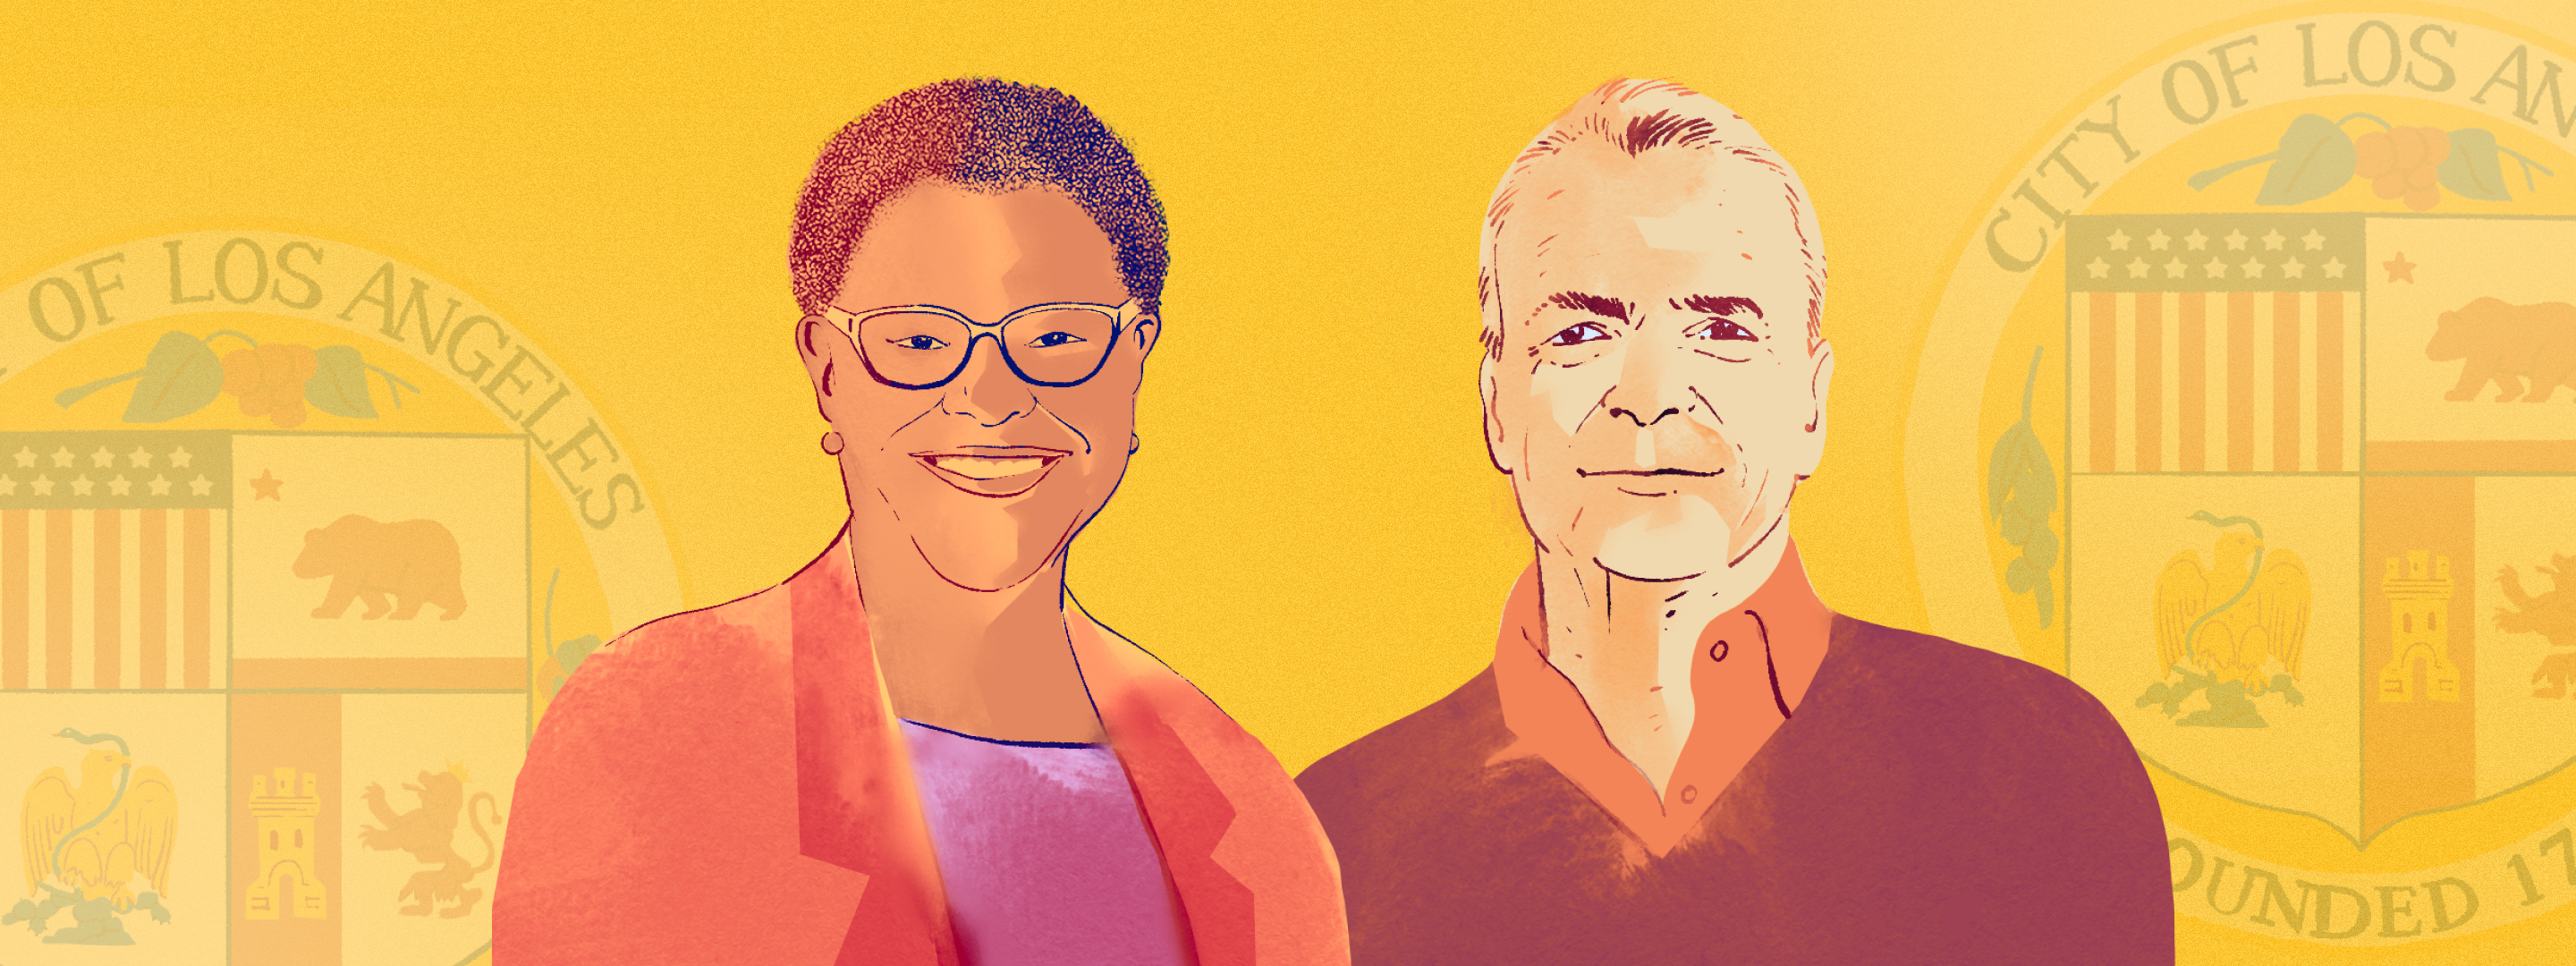 Illustration of LA Mayoral race candidates Karen Bass and Rick Caruso